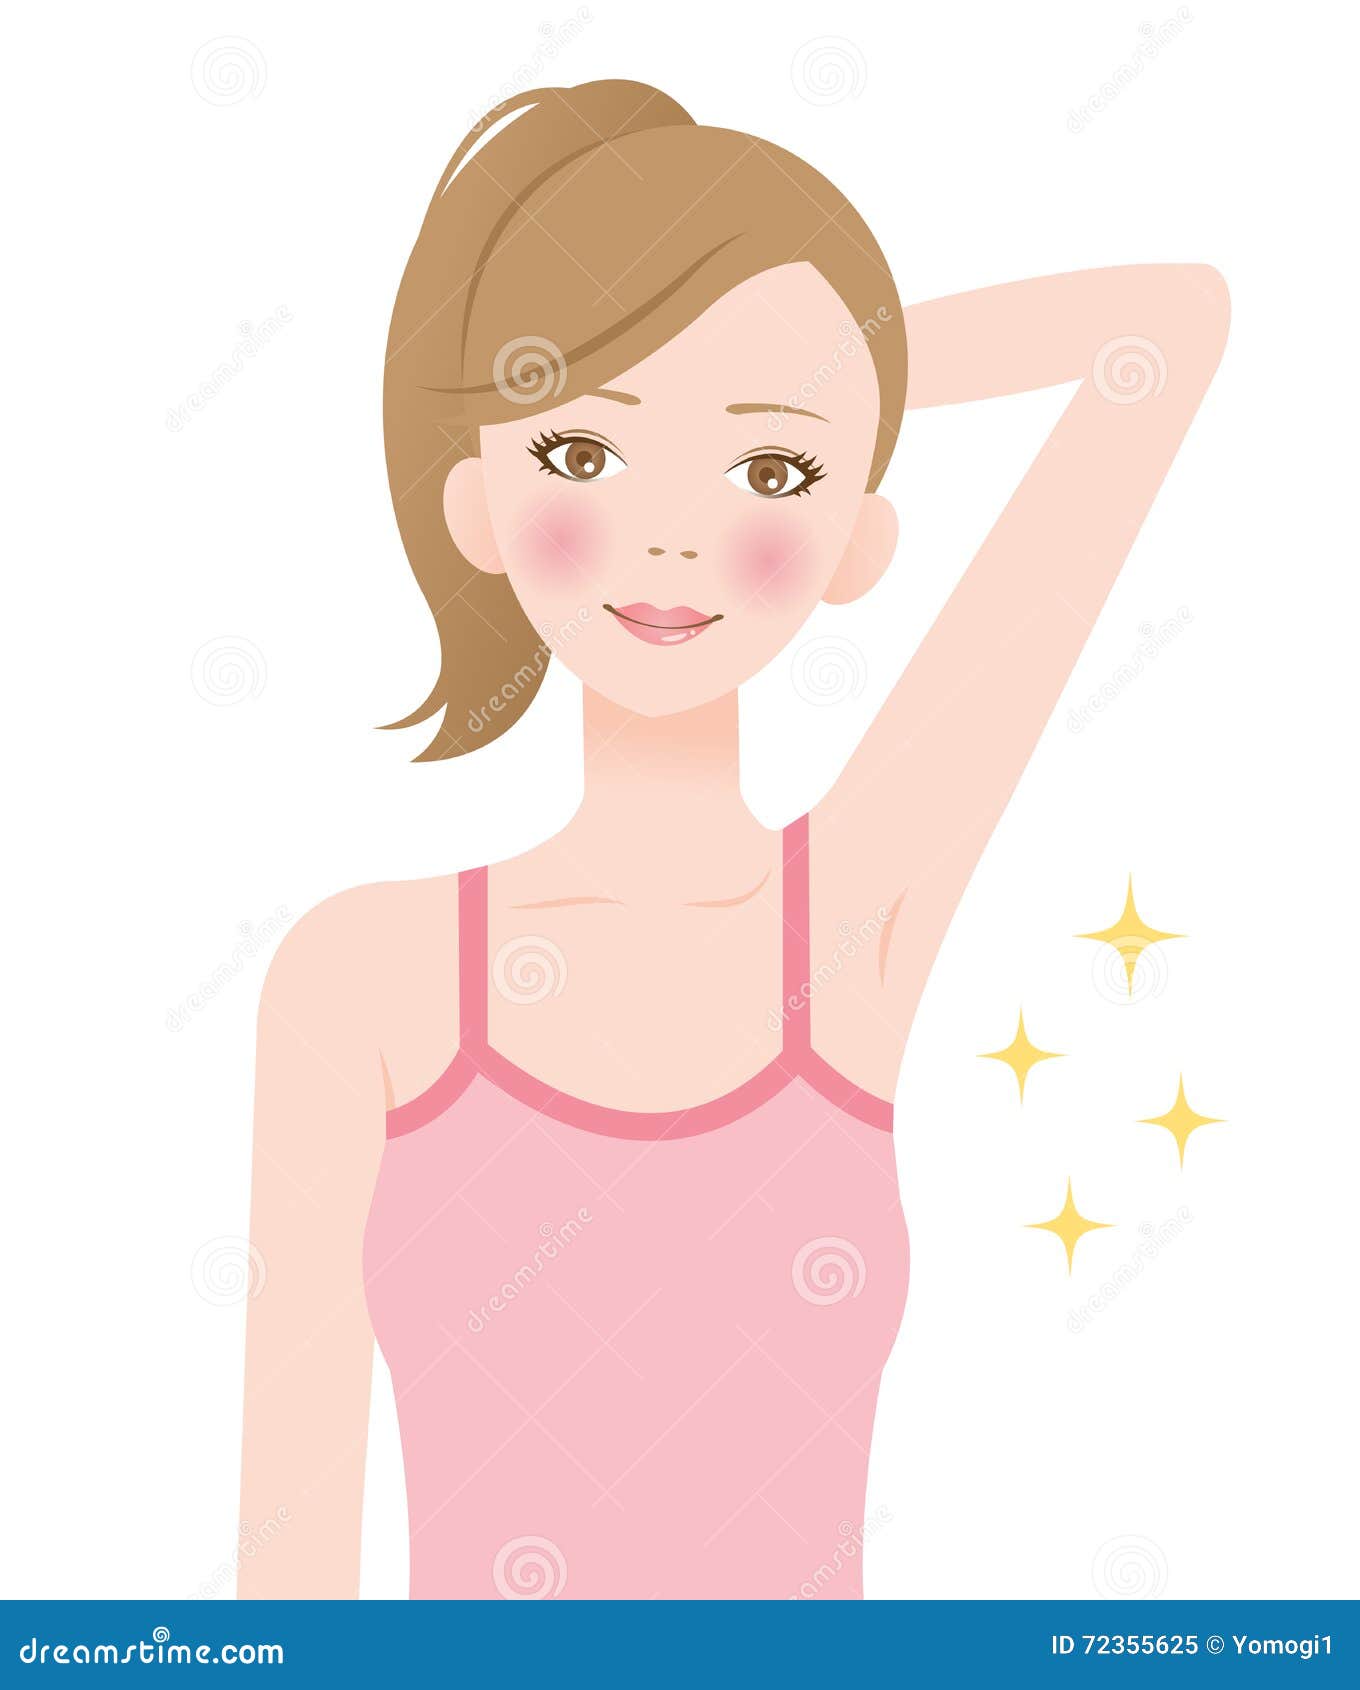 Underarm hair removal stock vector. Illustration of body - 72355625